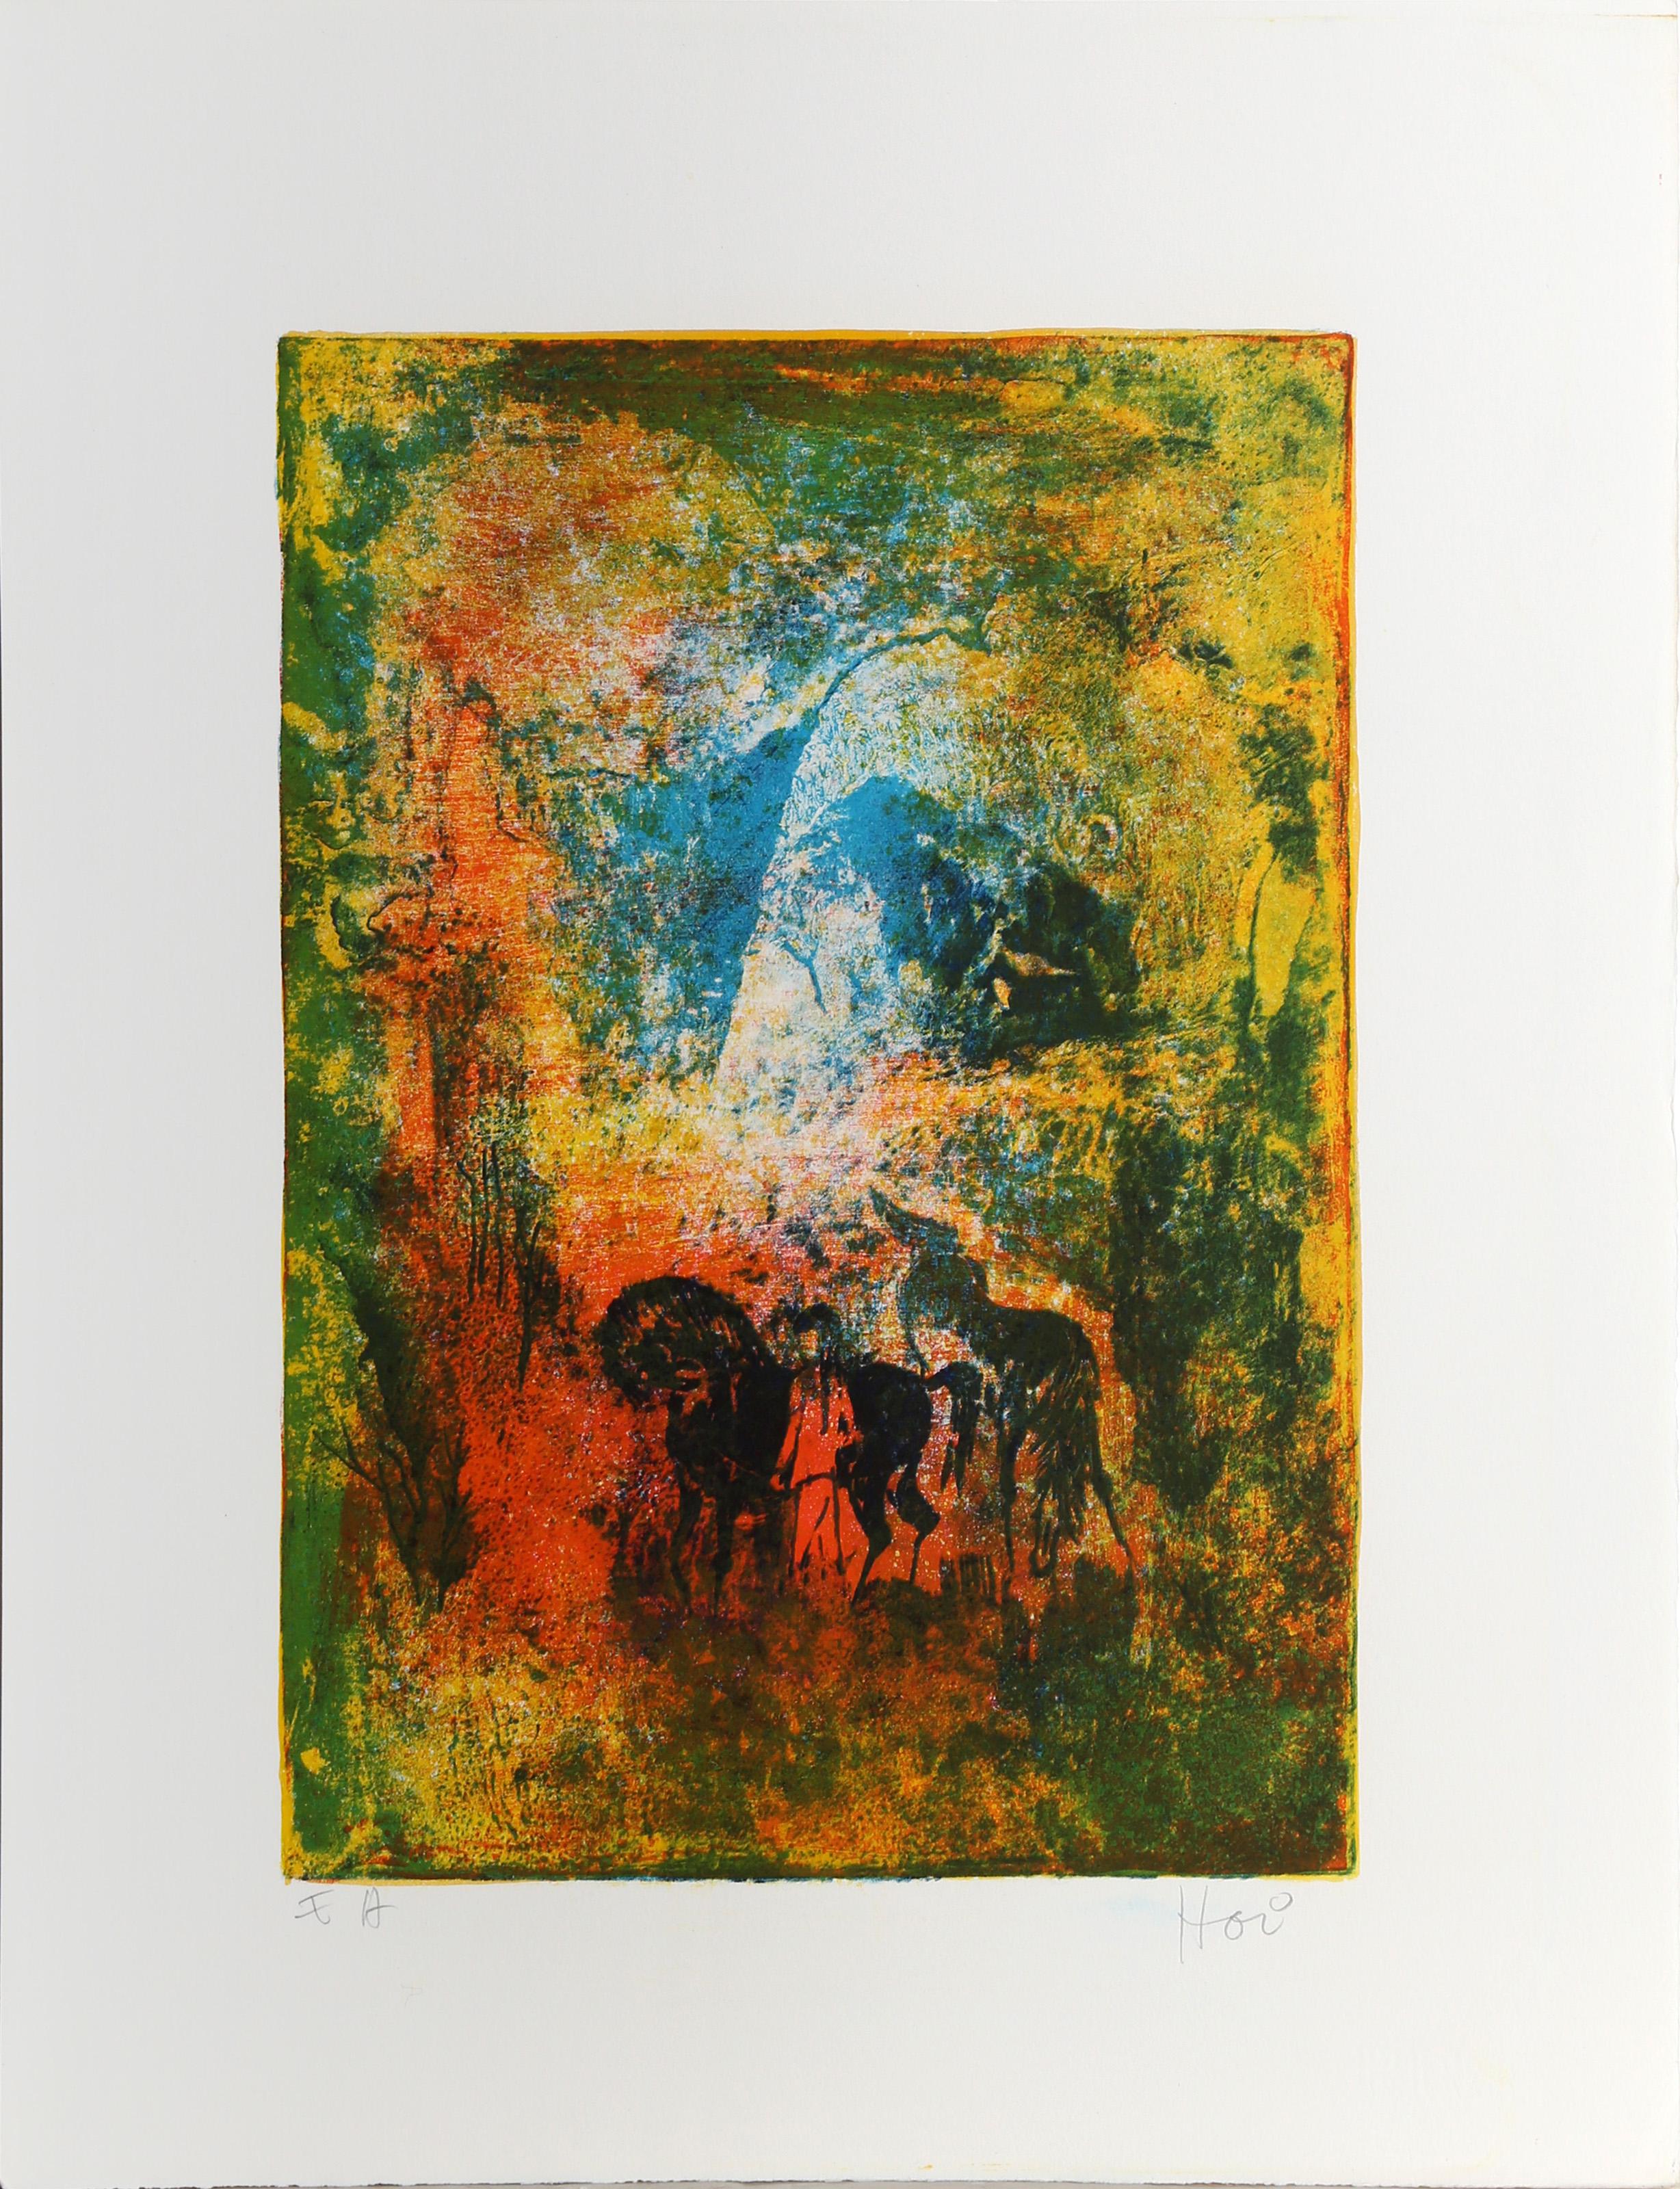 Lebadang (aka Hoi), Vietnamese (1922 - 2015) -  Horses by the Mountains. Medium: Lithograph on Rives BFK, signed "Hoi" and numbered in pencil, Edition: E.A., Image Size: 18 x 12.5 inches, Size: 25.5 x 19.5 in. (64.77 x 49.53 cm), Description: